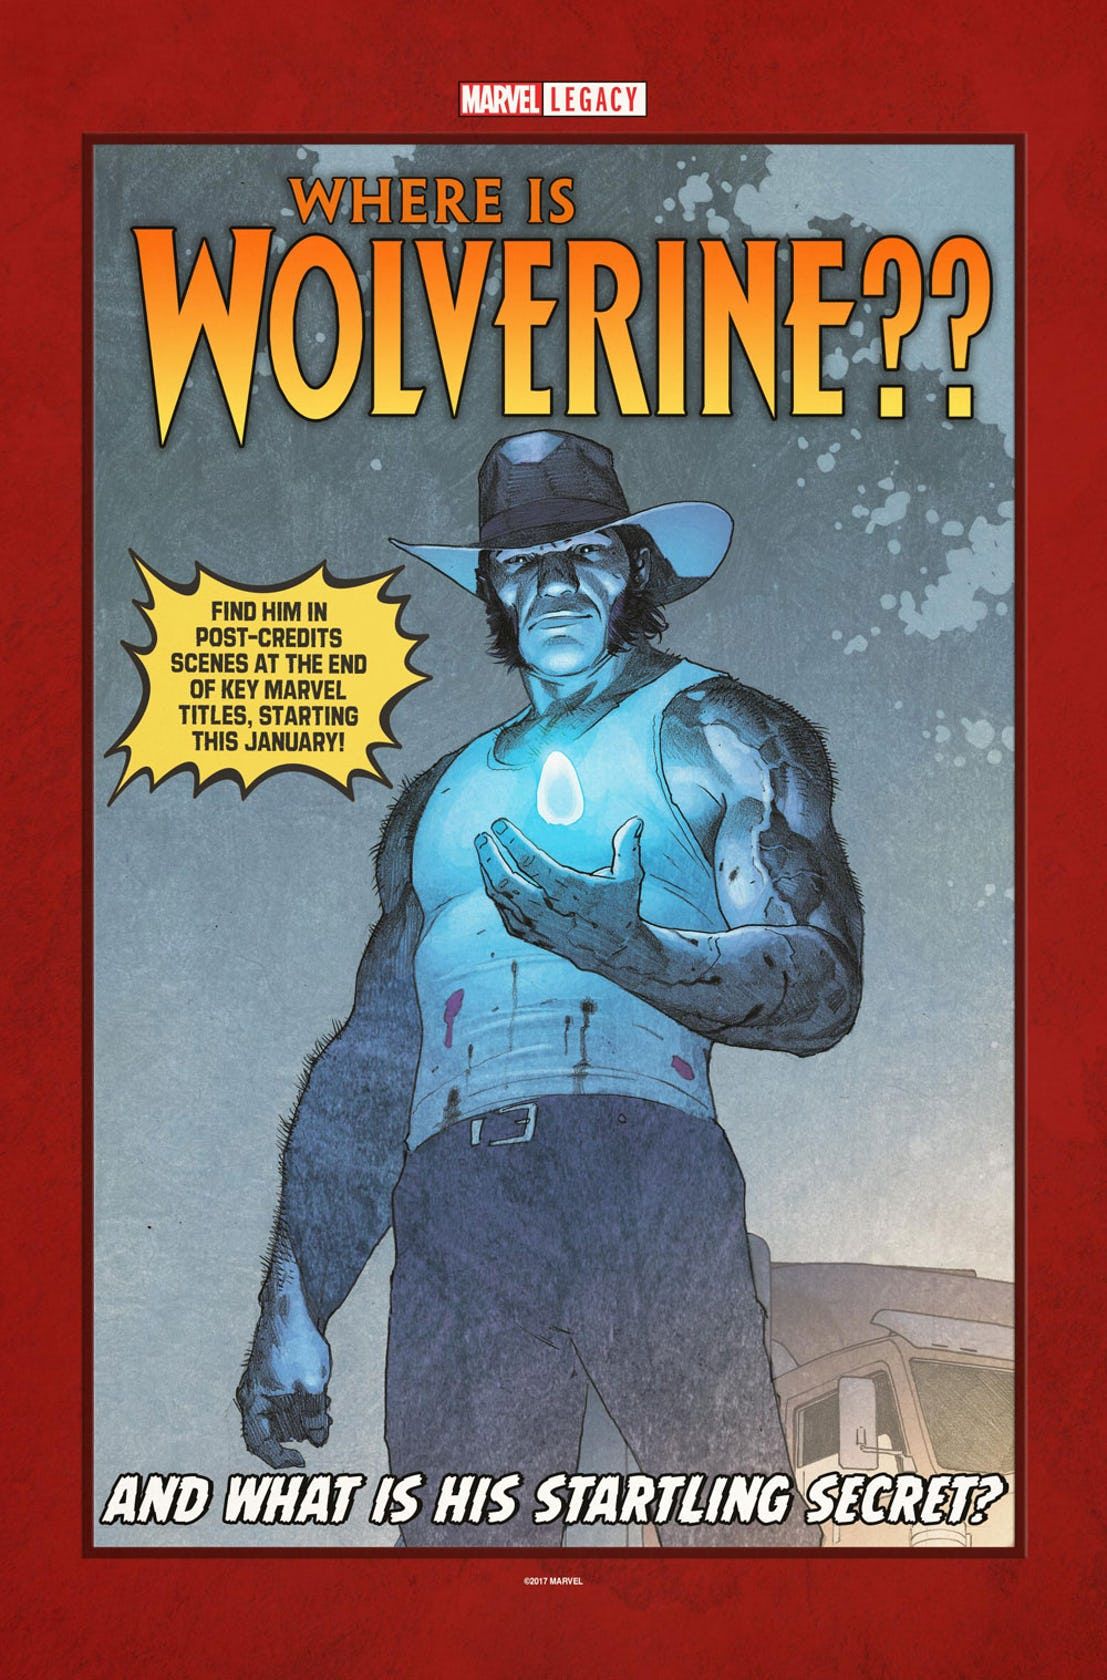 Where is wolverine post-credits scene teaser